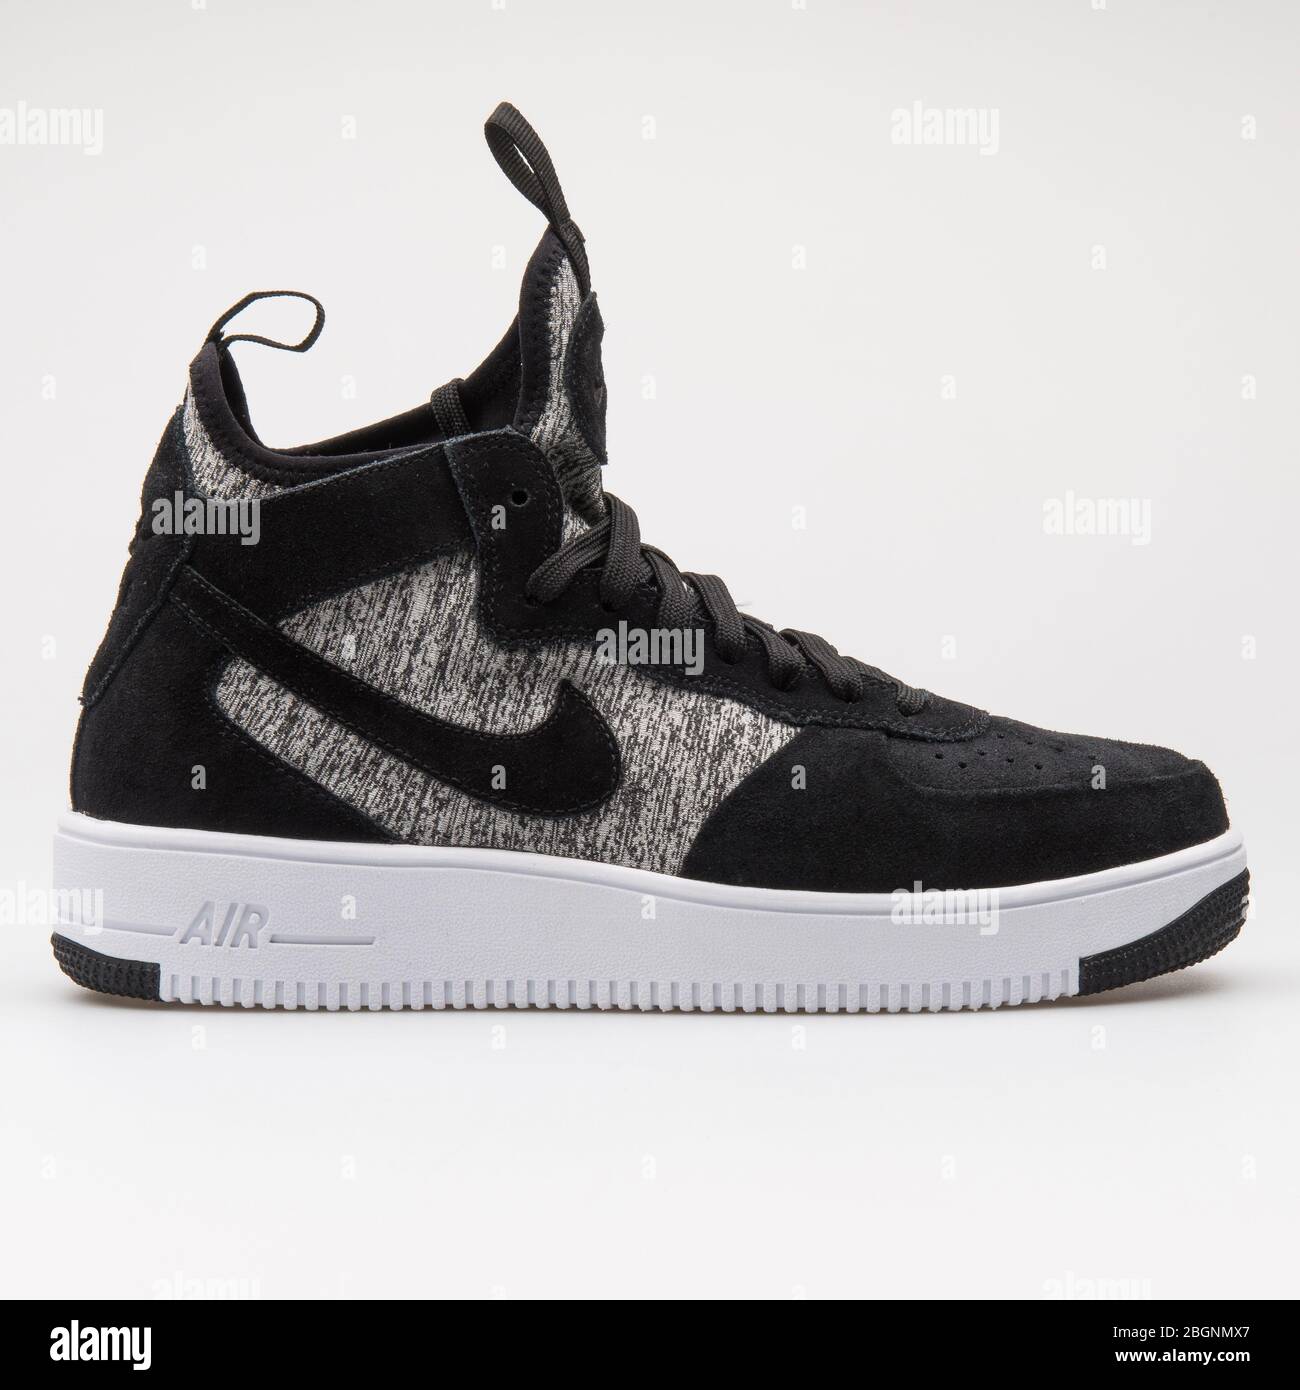 VIENNA, AUSTRIA - AUGUST 14, 2017: Nike Air Force 1 Ultraforce Mid Premium  black and white sneaker on white background Stock Photo - Alamy